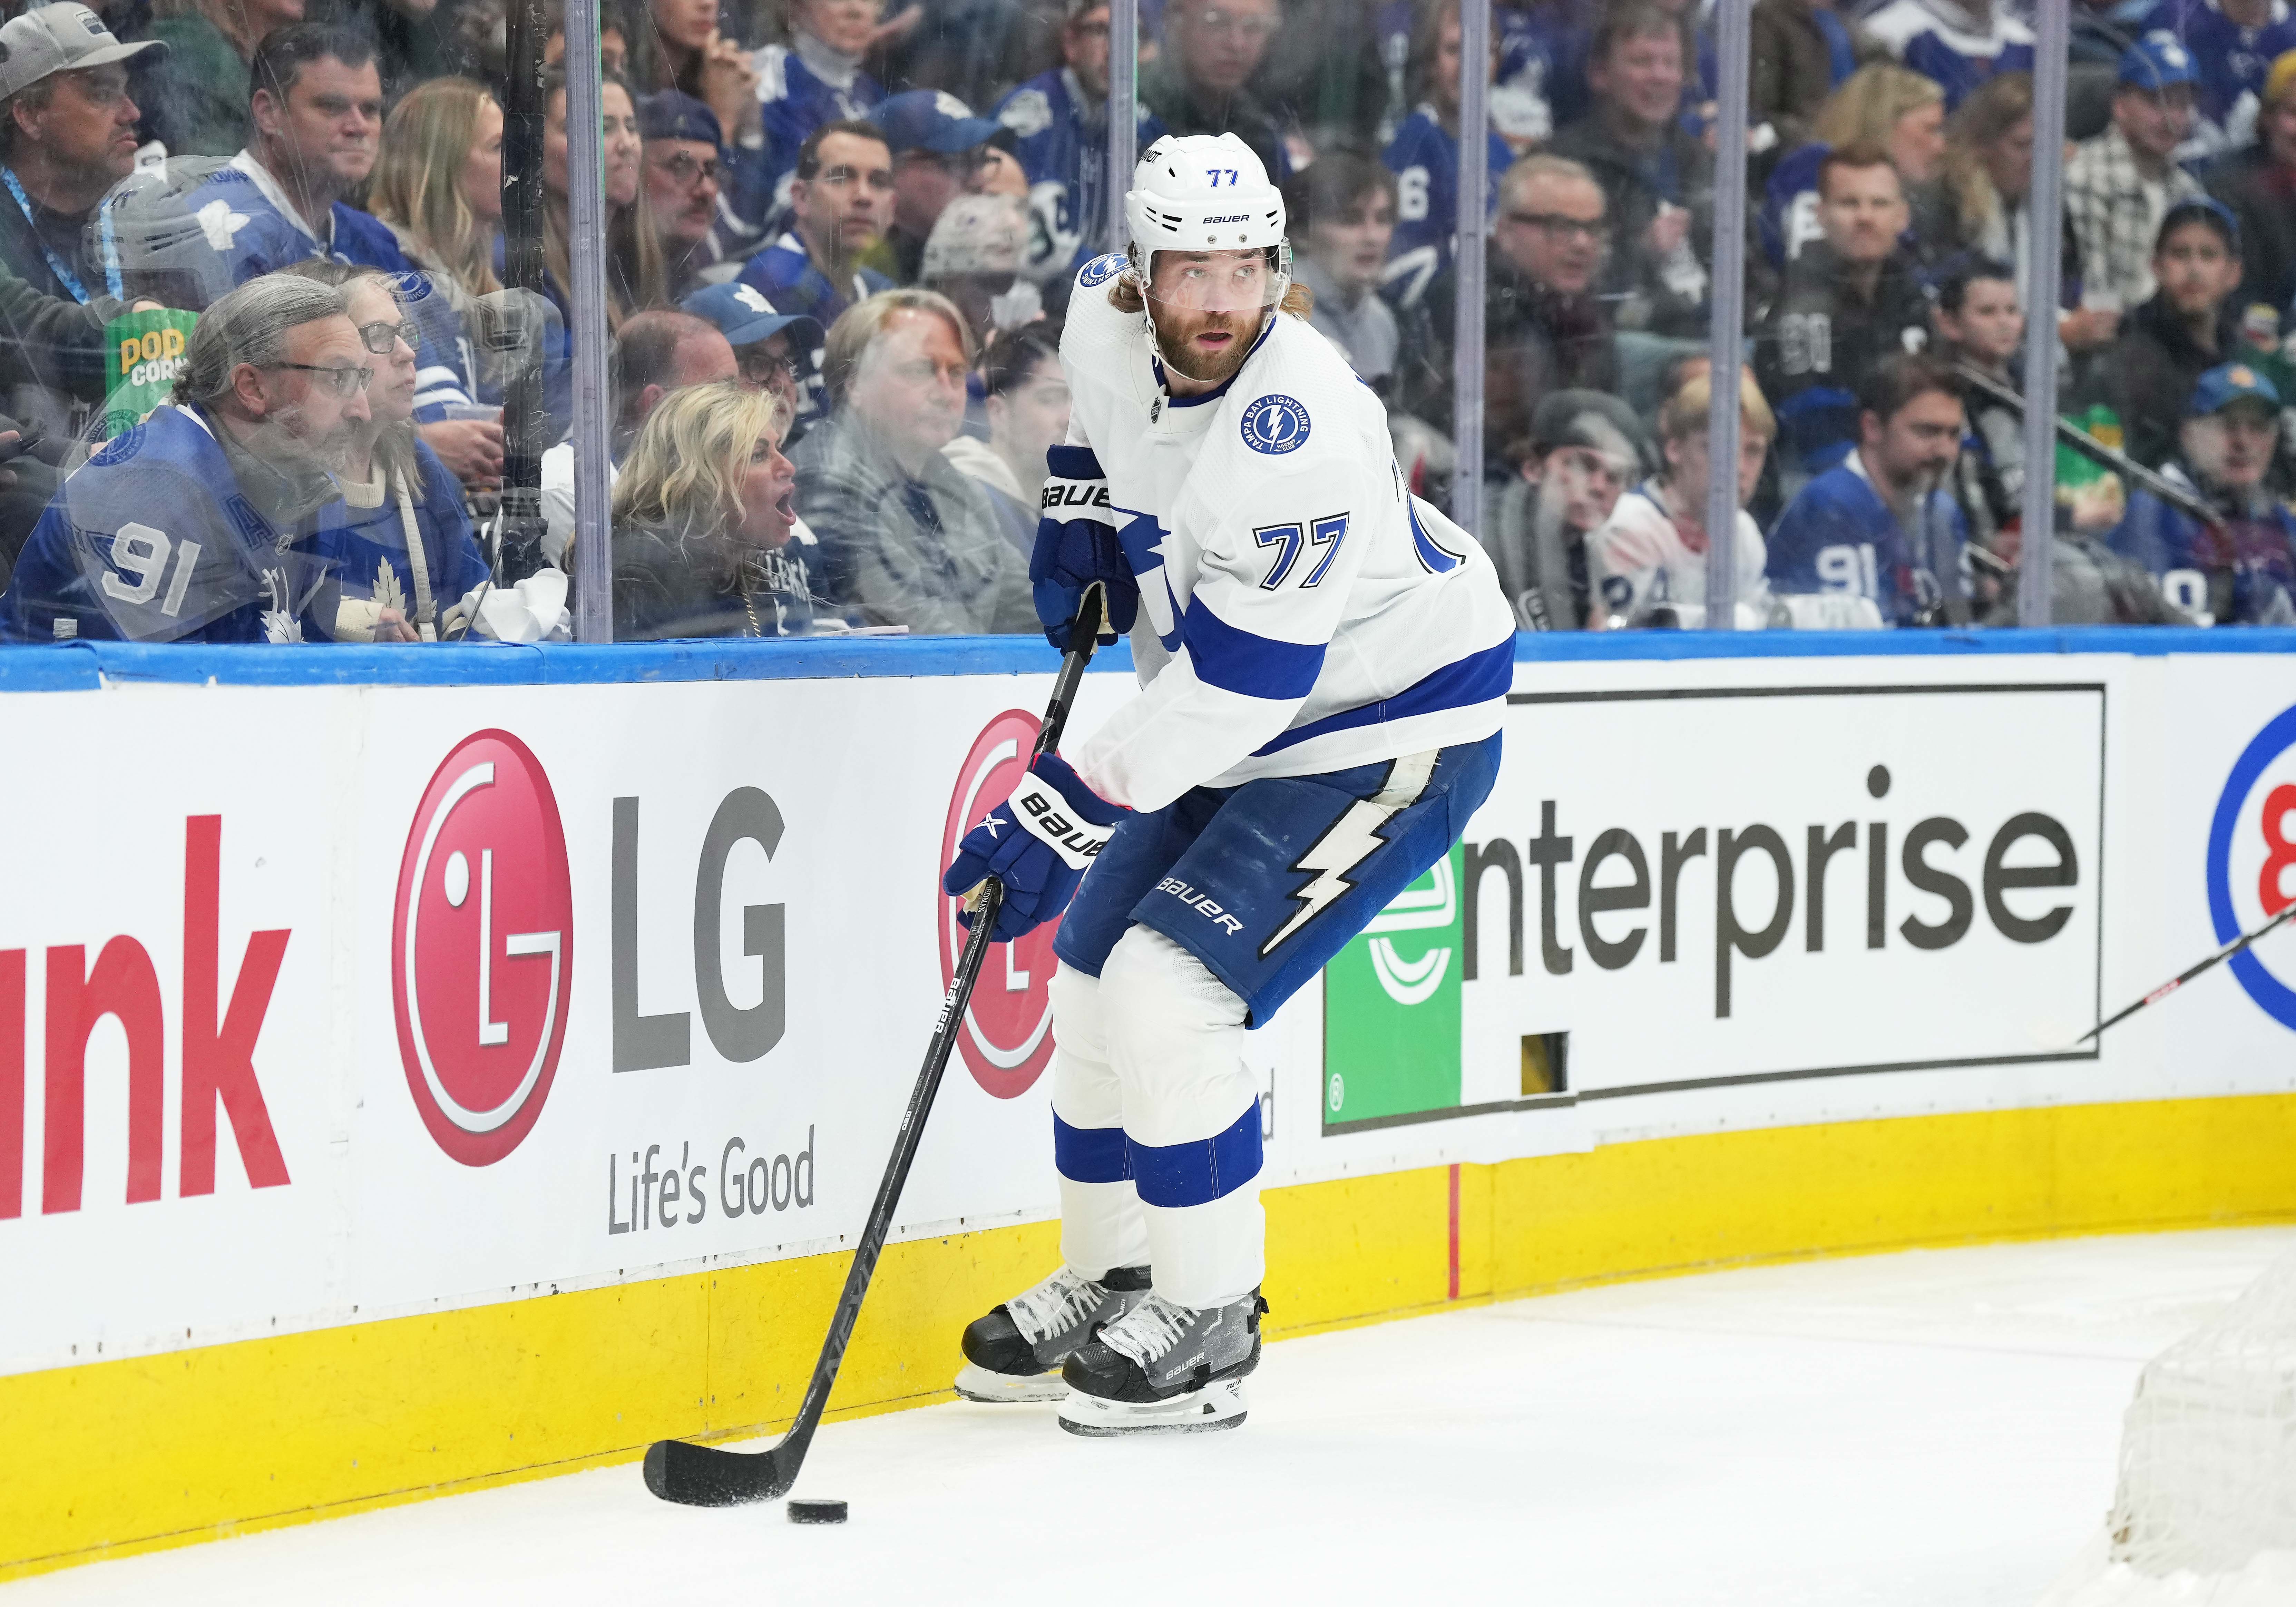 New Lightning forward Tanner Jeannot ready to get things going